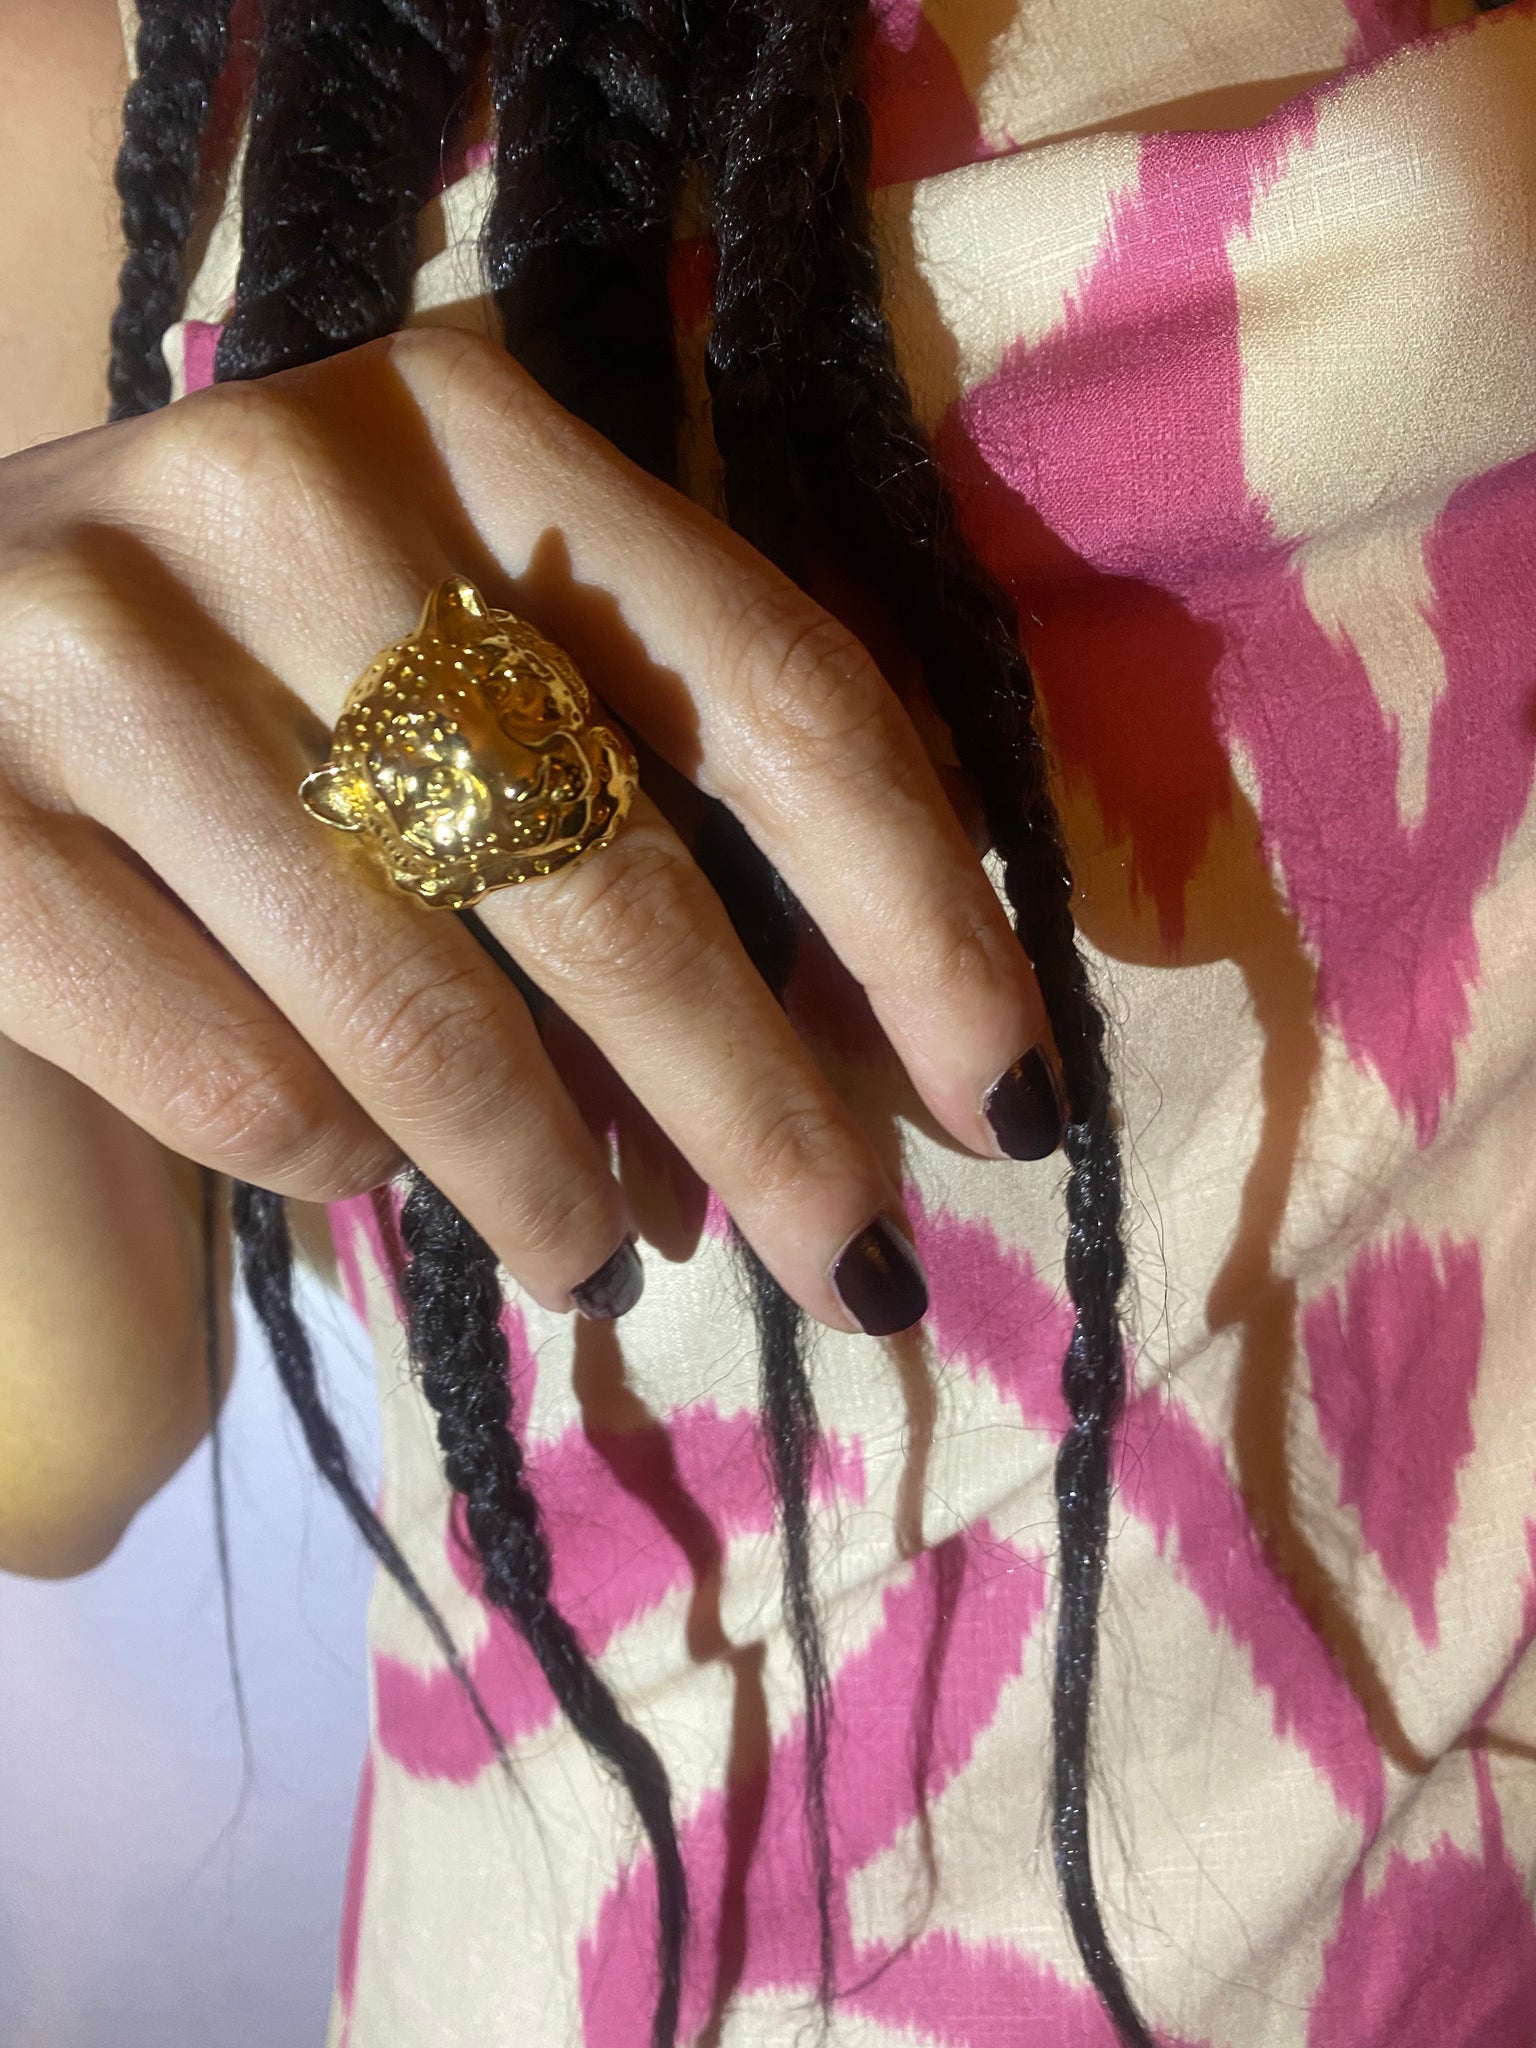 A woman holds up her hand wearing a gold snow leopard ring and wearing an adras dress and long braids.